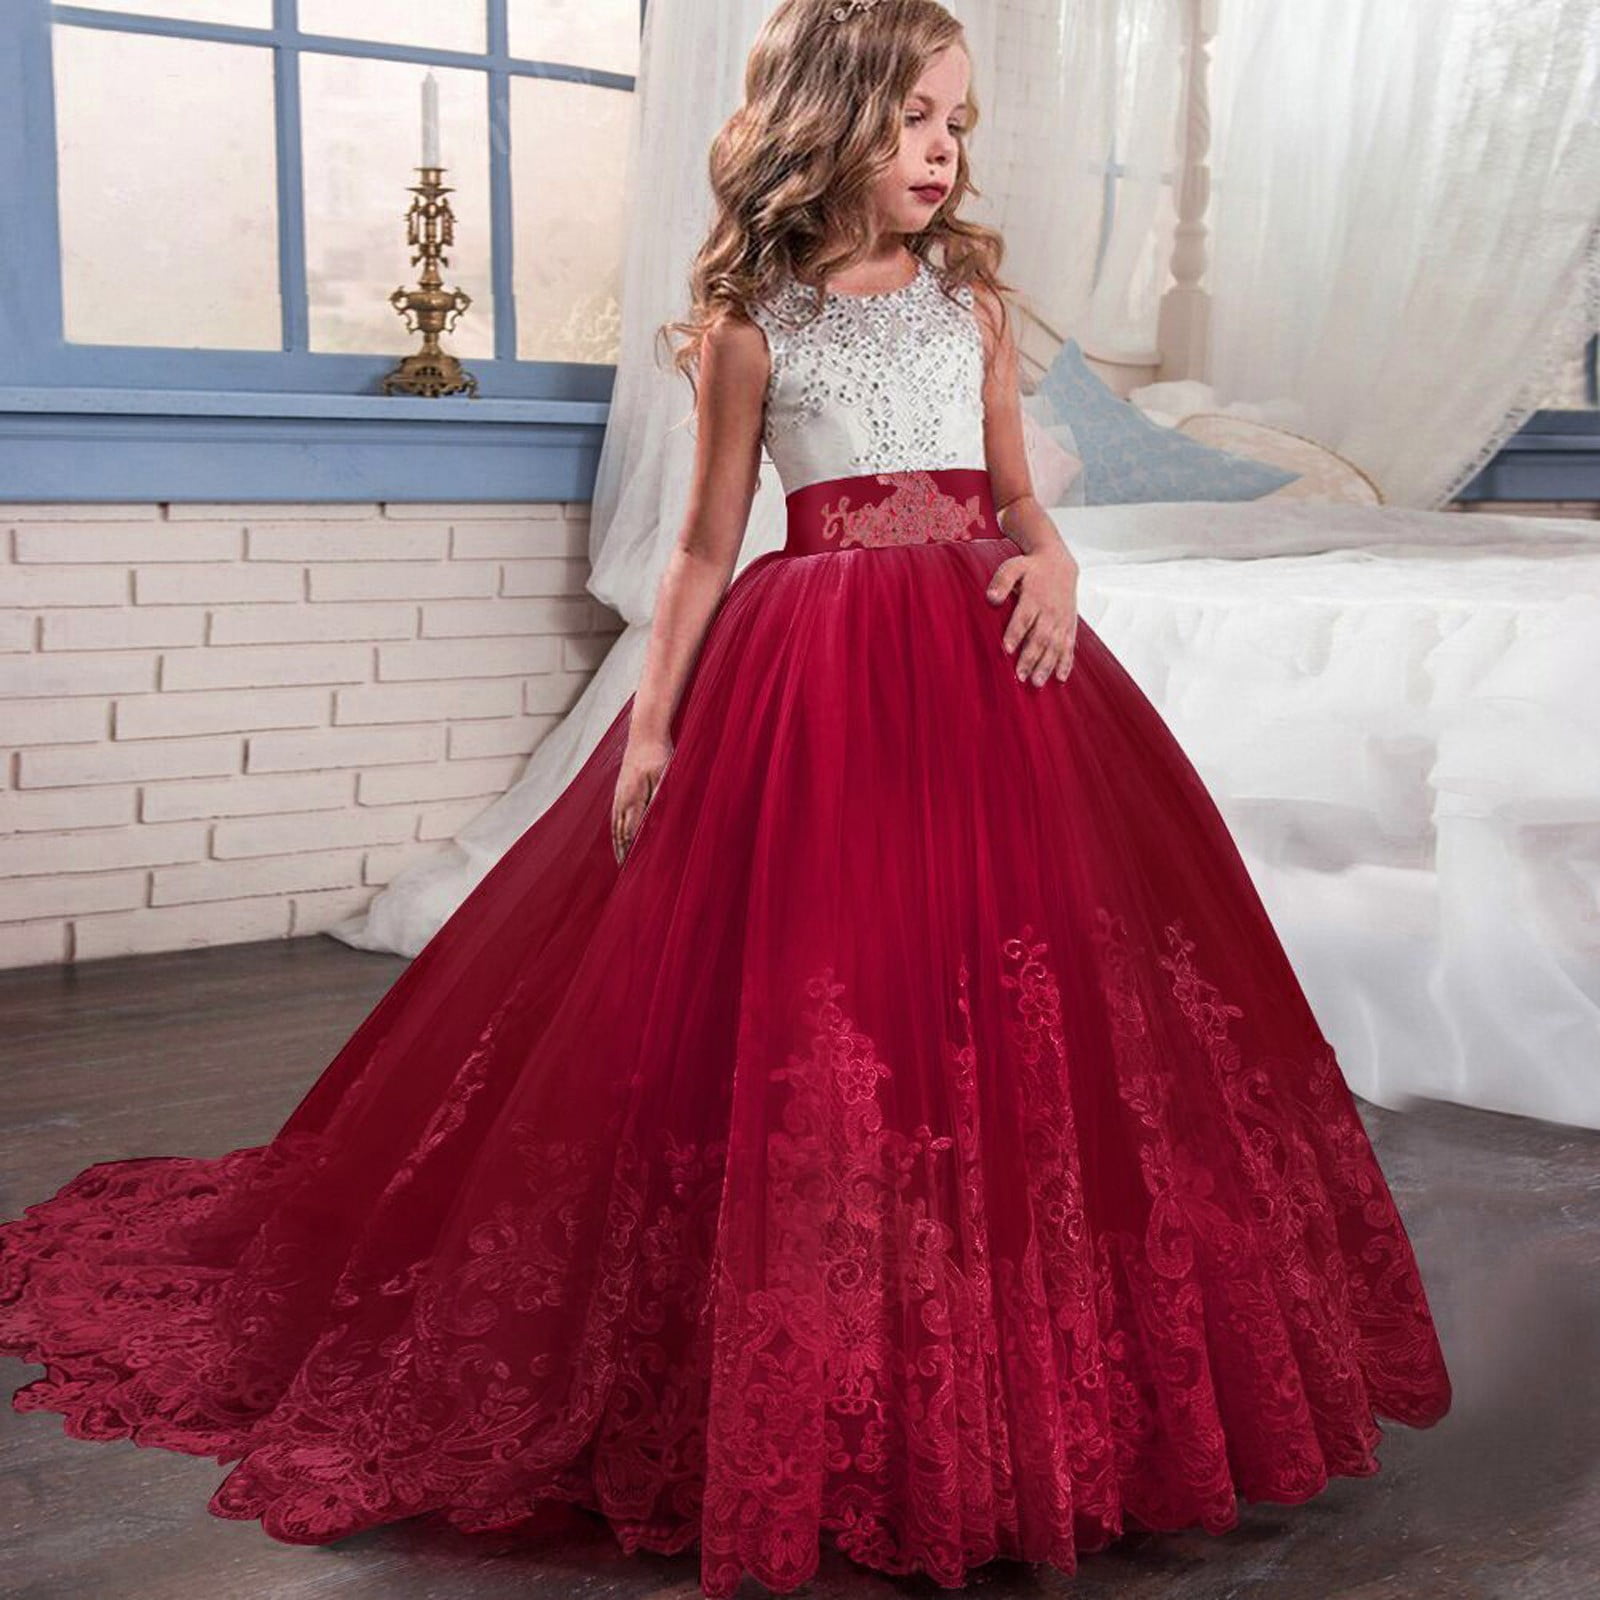 Bling White Princess Princess Evening Gown For Little Girls Perfect For  Weddings, First Holy Communion, Birthdays, Pageants And Special Occasions  From Weddingpromgirl, $82.8 | DHgate.Com